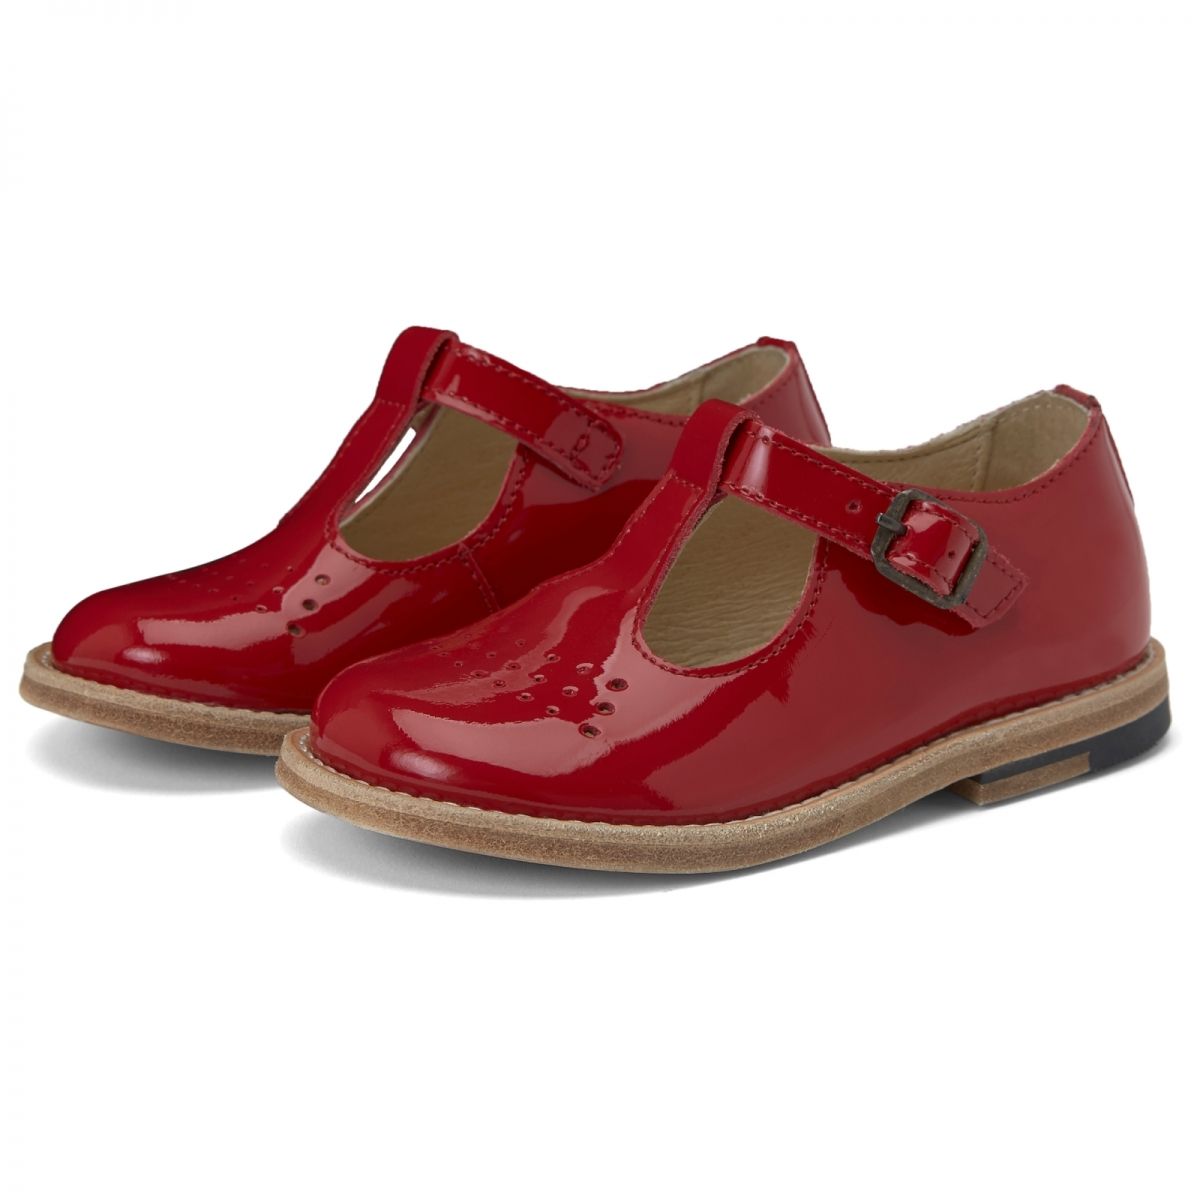 Young Soles T-bar Shoe Dottie Patent Leather london red DOT-PATENT-RED 